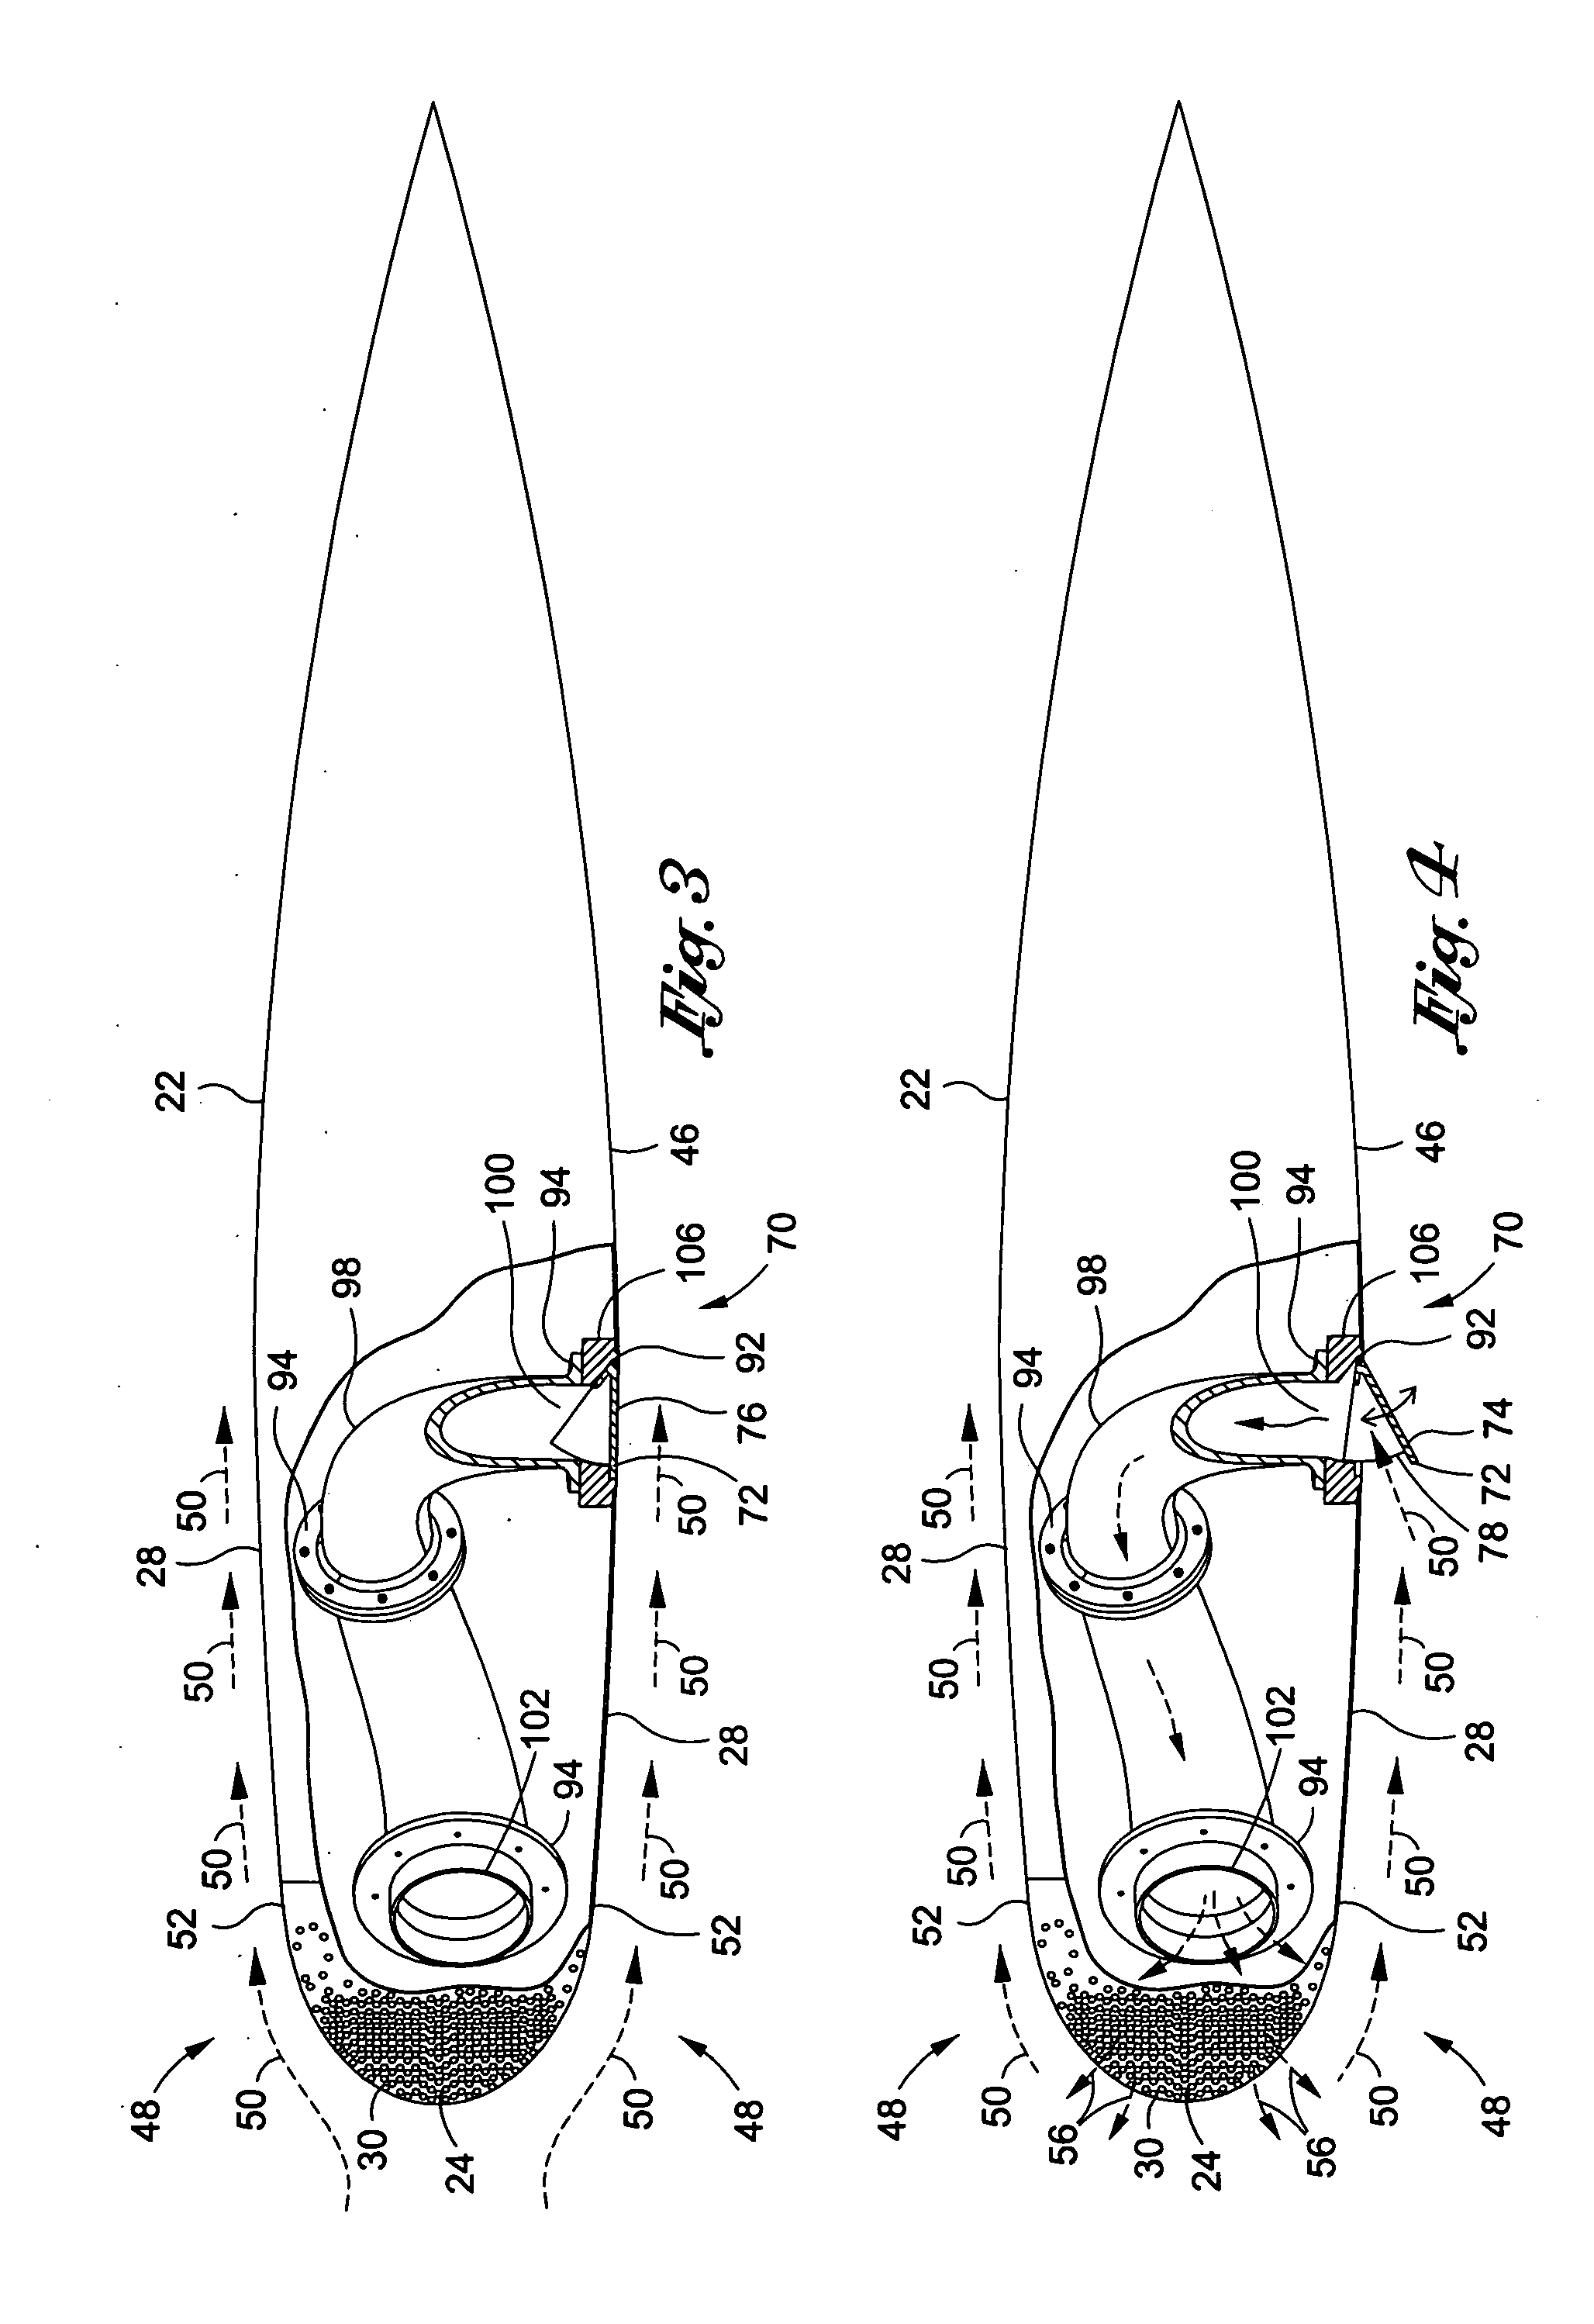 Apparatus & method for passive purging of micro-perforated aerodynamic surfaces